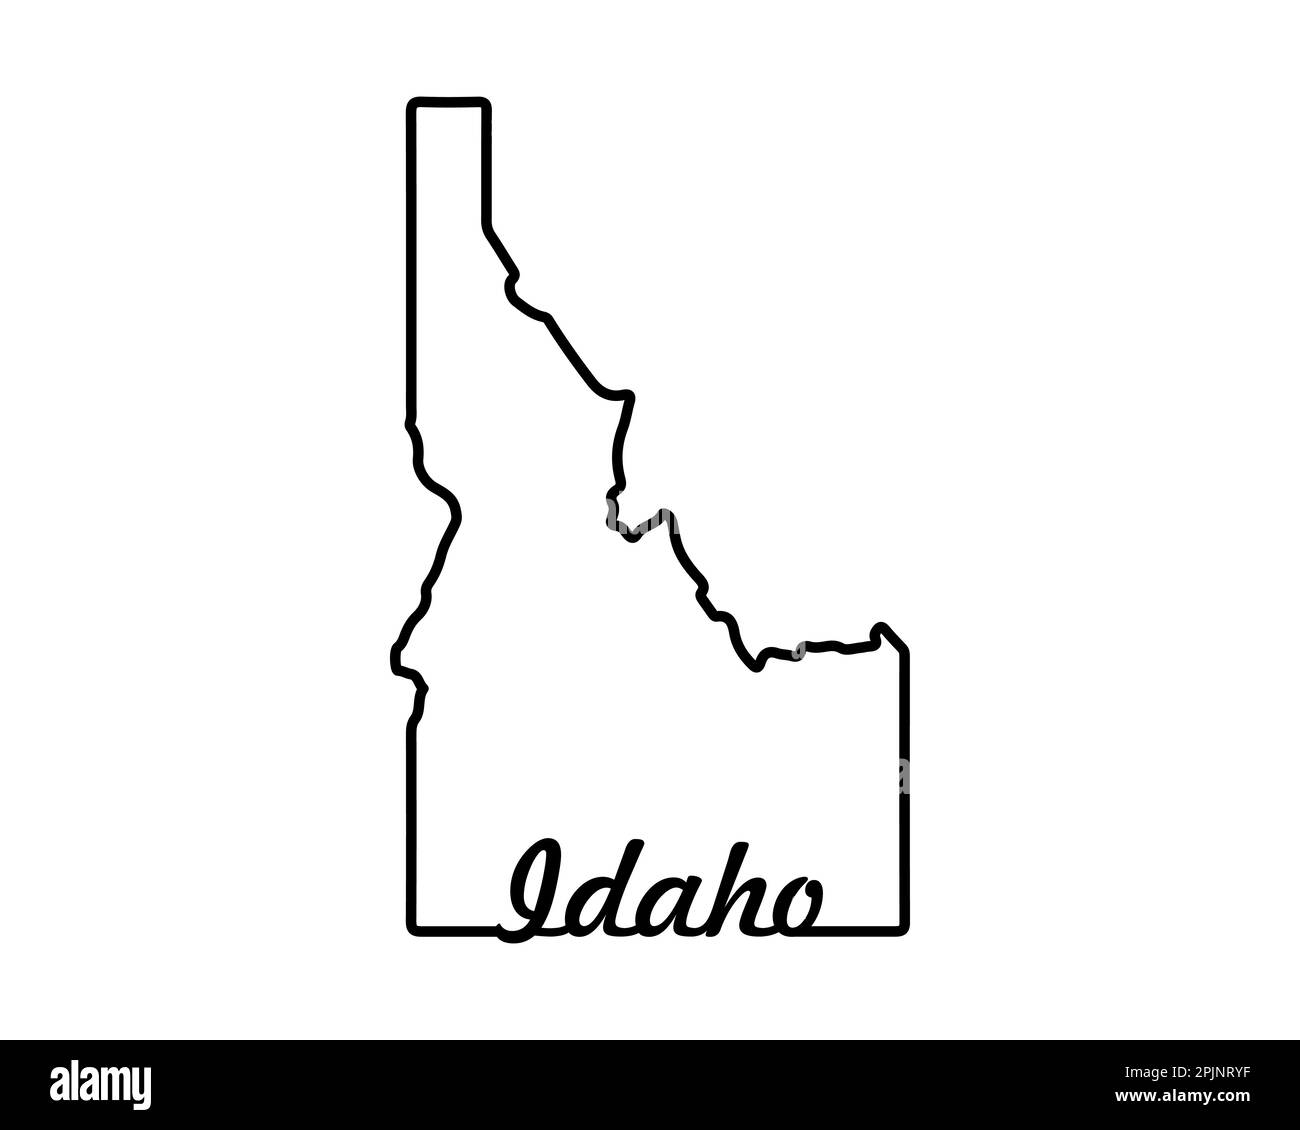 Idaho state map. US state map. Idaho silhouette symbol. Retro text. Vector illustration Stock Vector